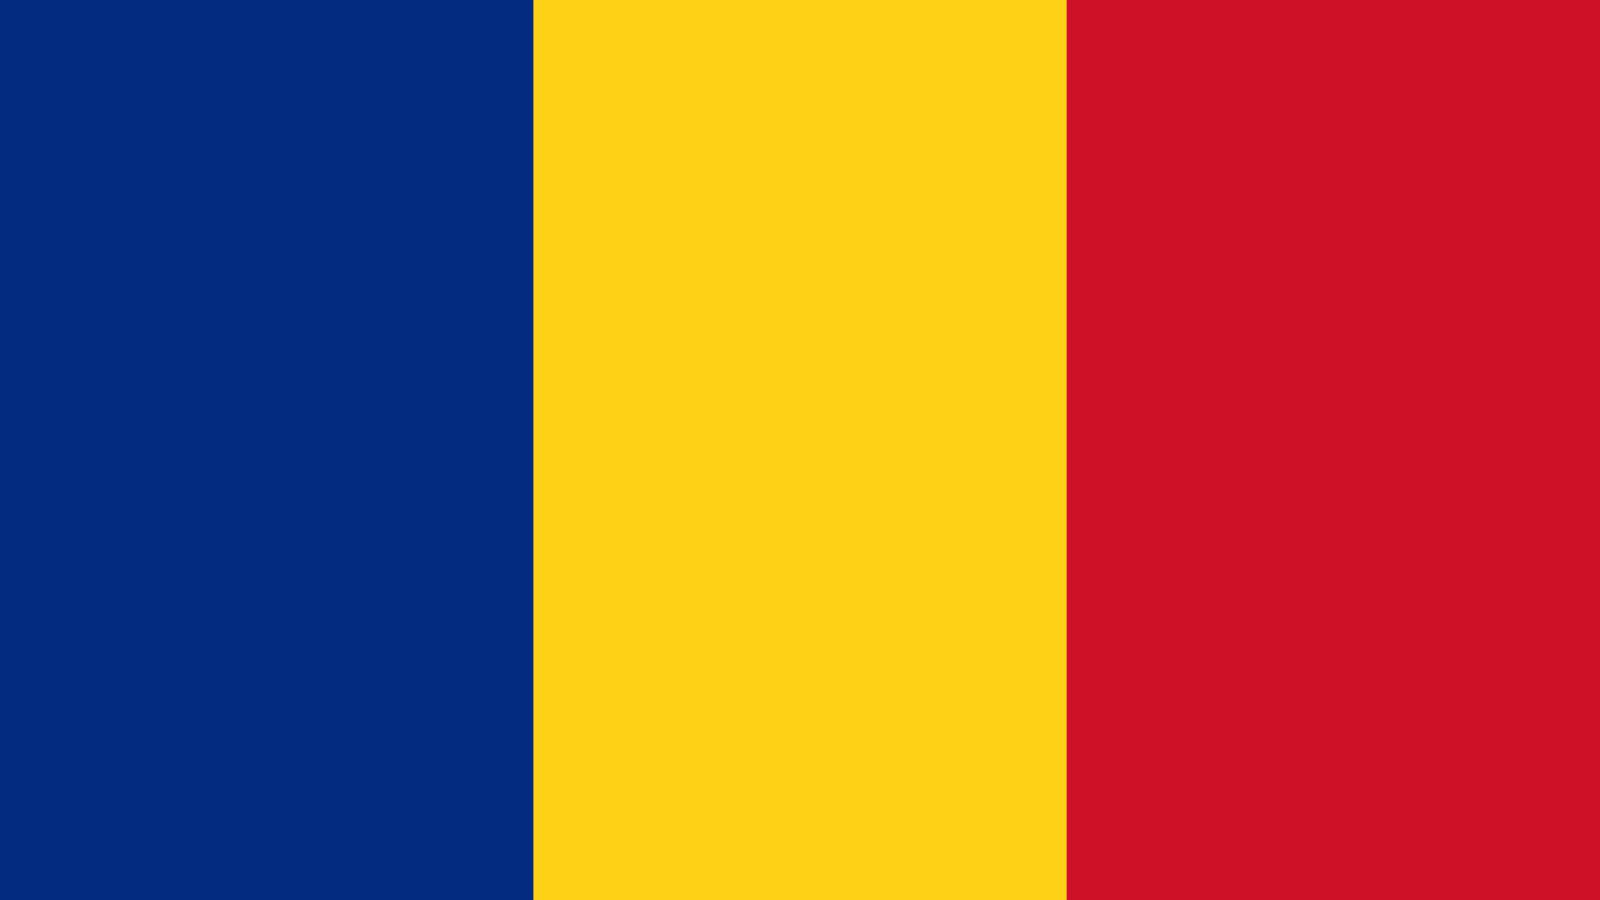 The Government of Romania bulletins